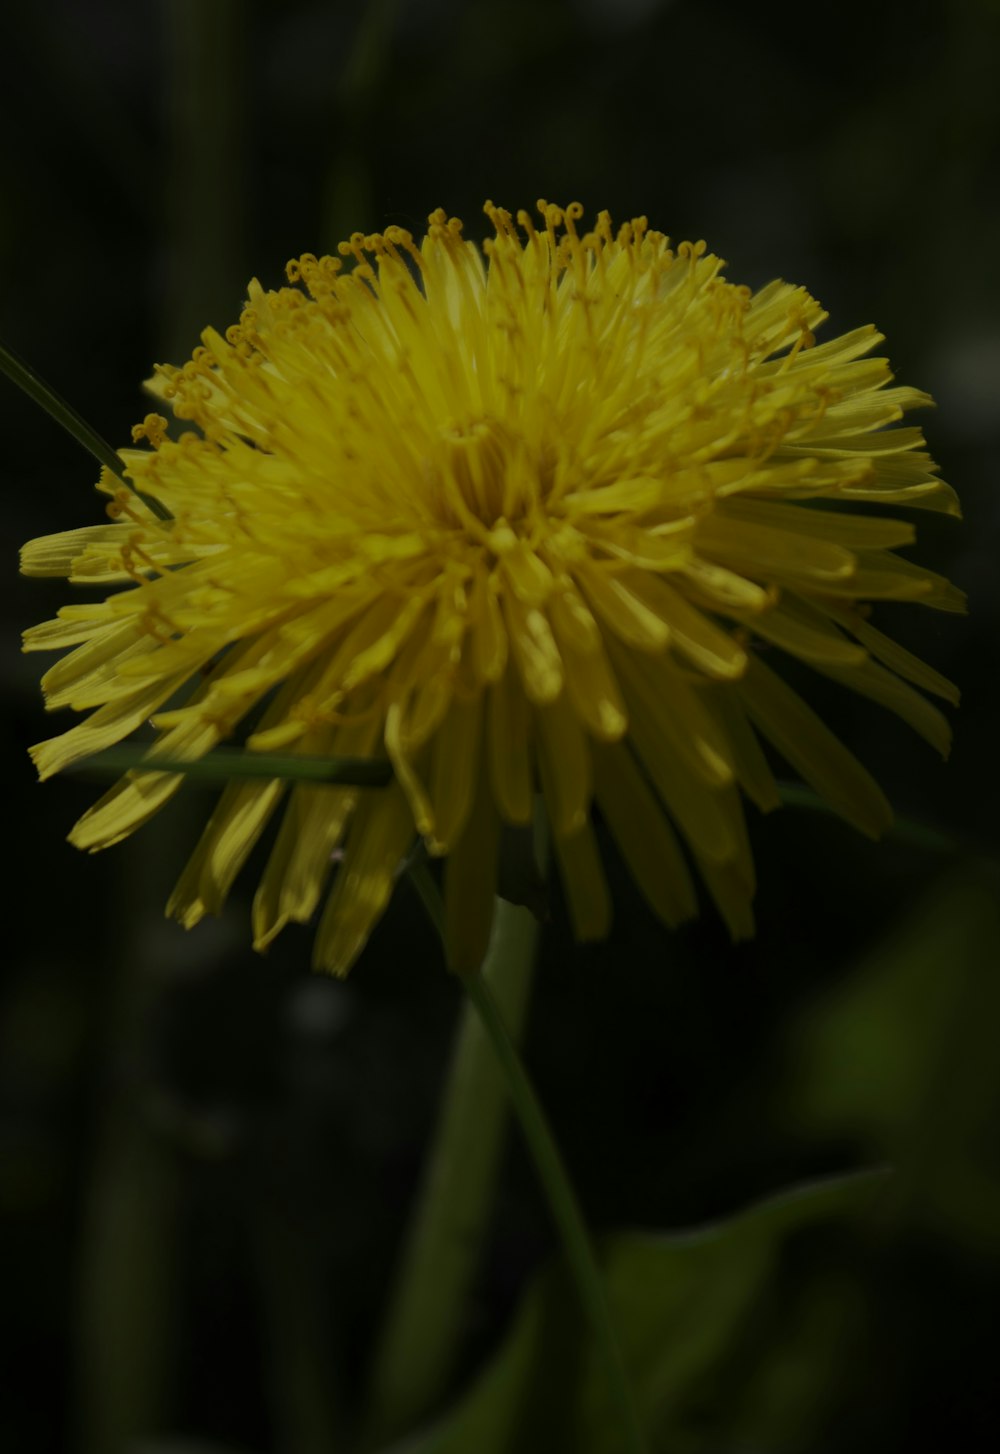 a close up of a yellow dandelion flower